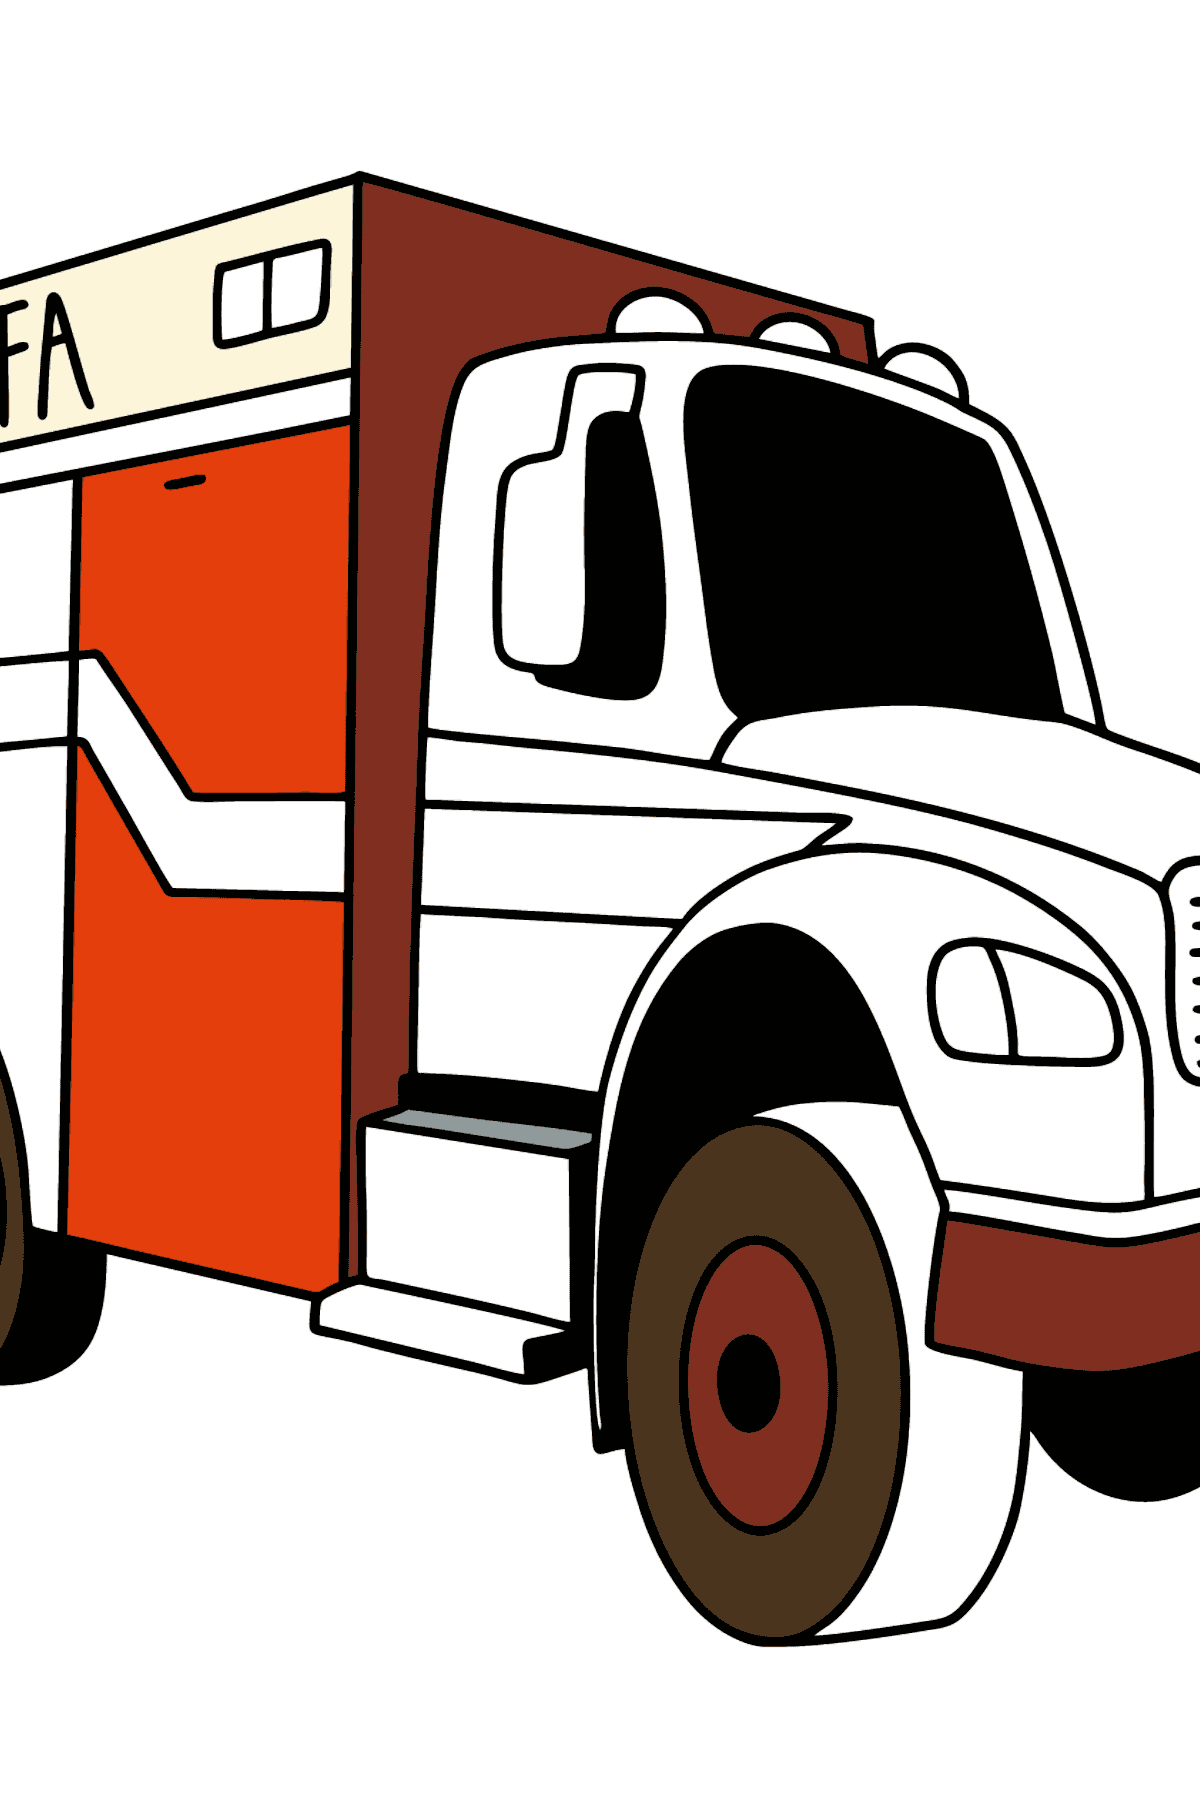 Fire Truck in Argentina coloring page - Coloring Pages for Kids